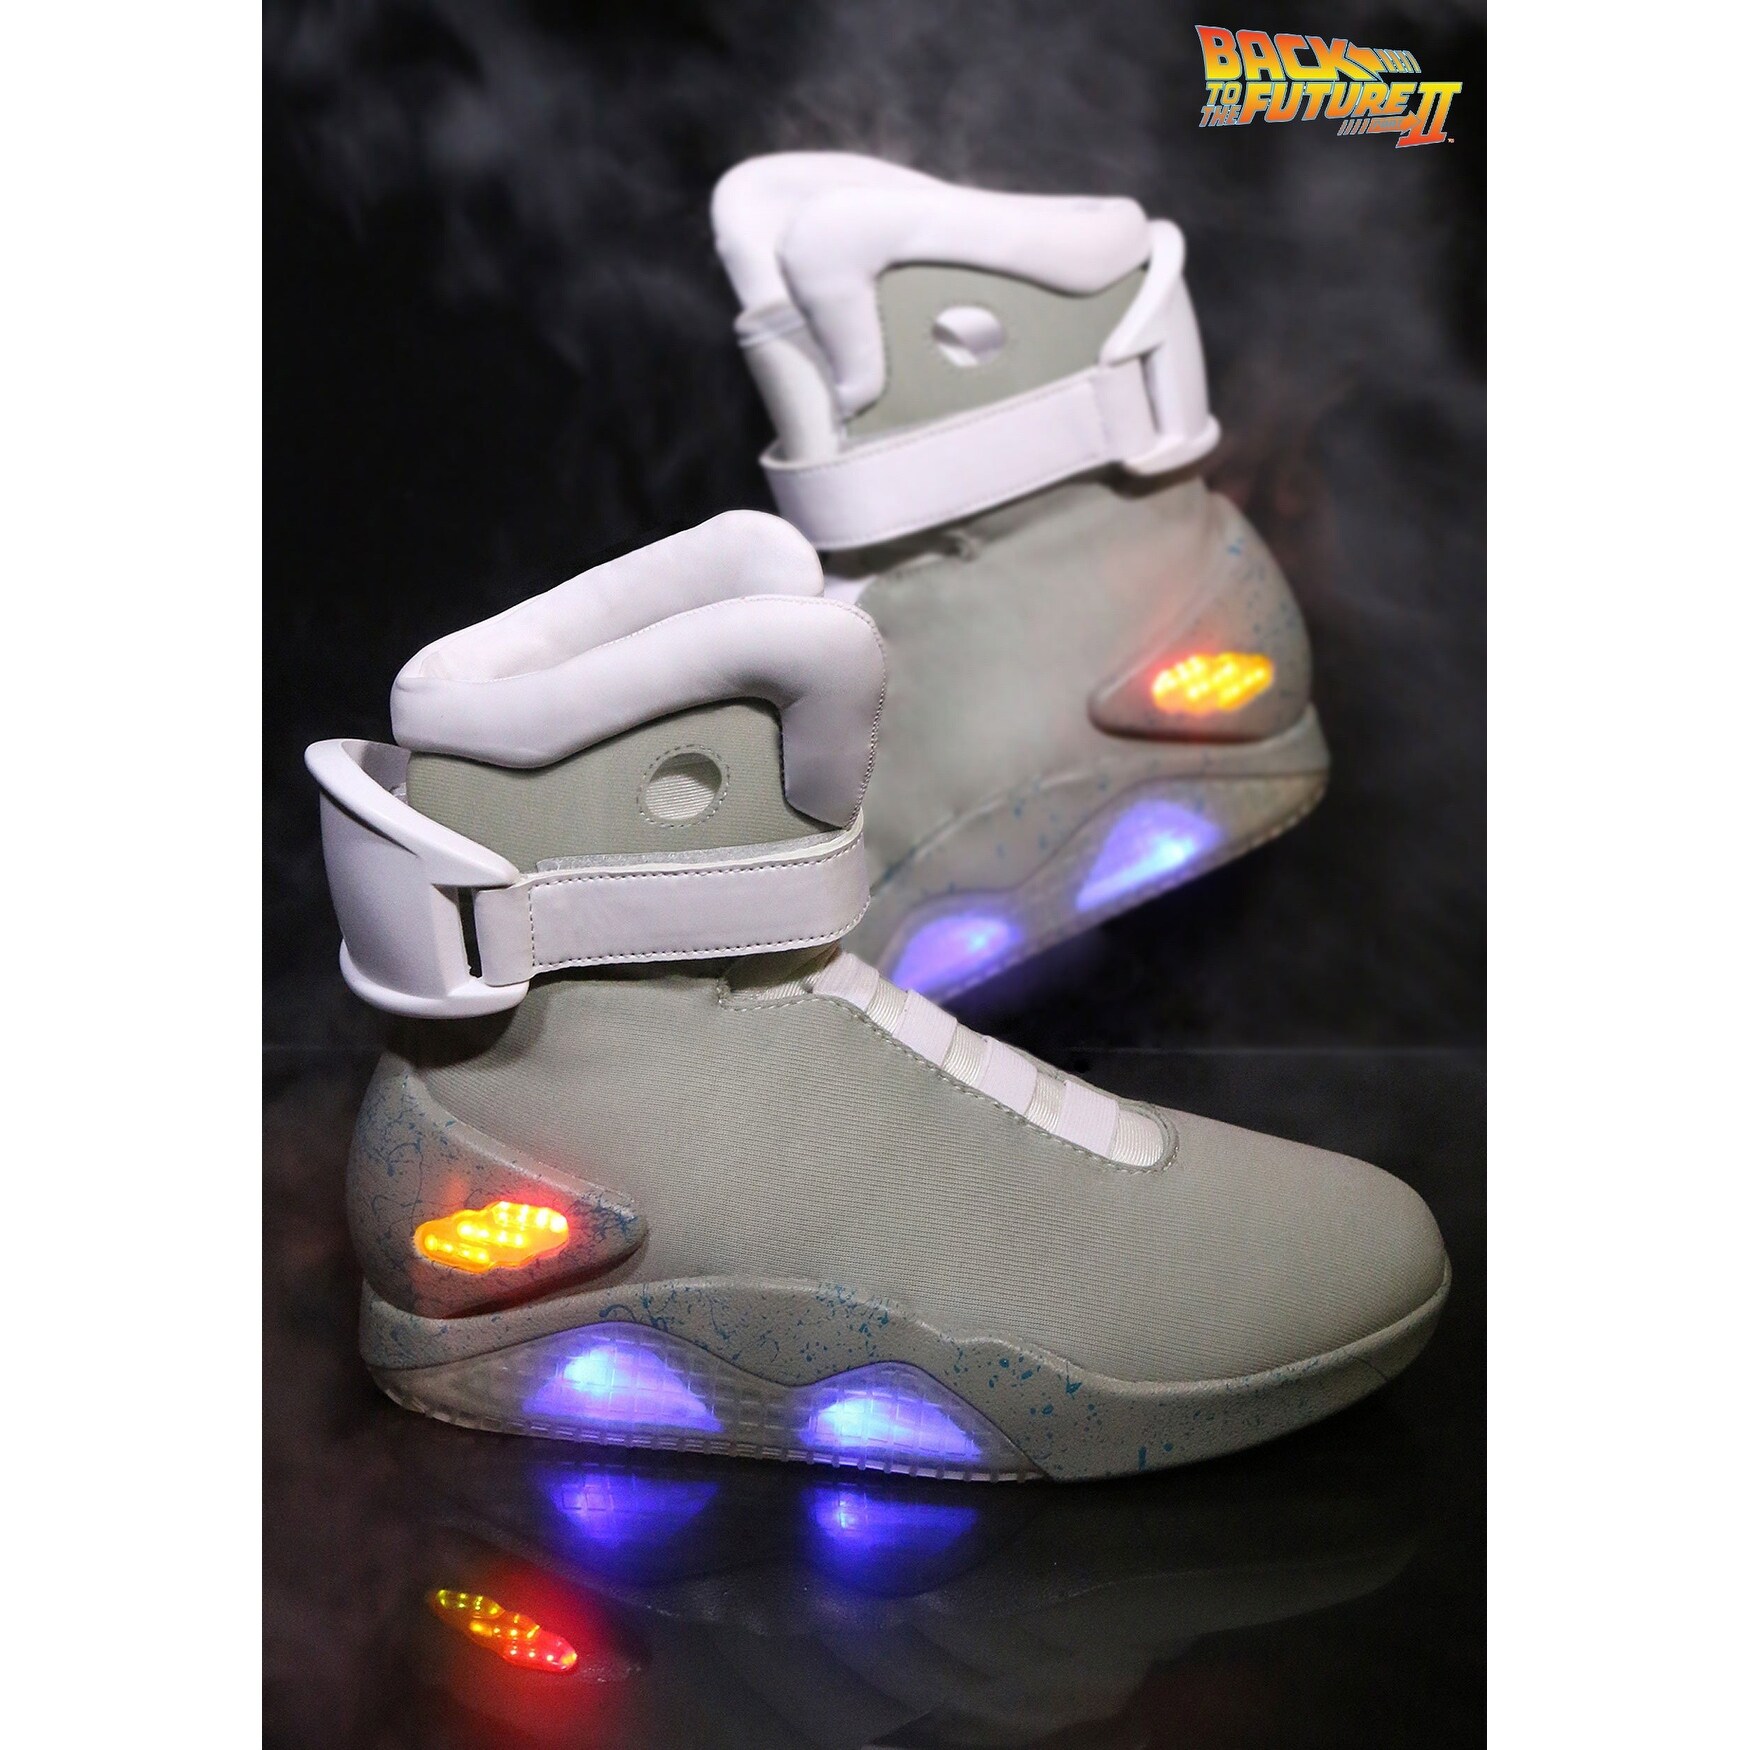 Light Up Shoes - Overstock - 13052612